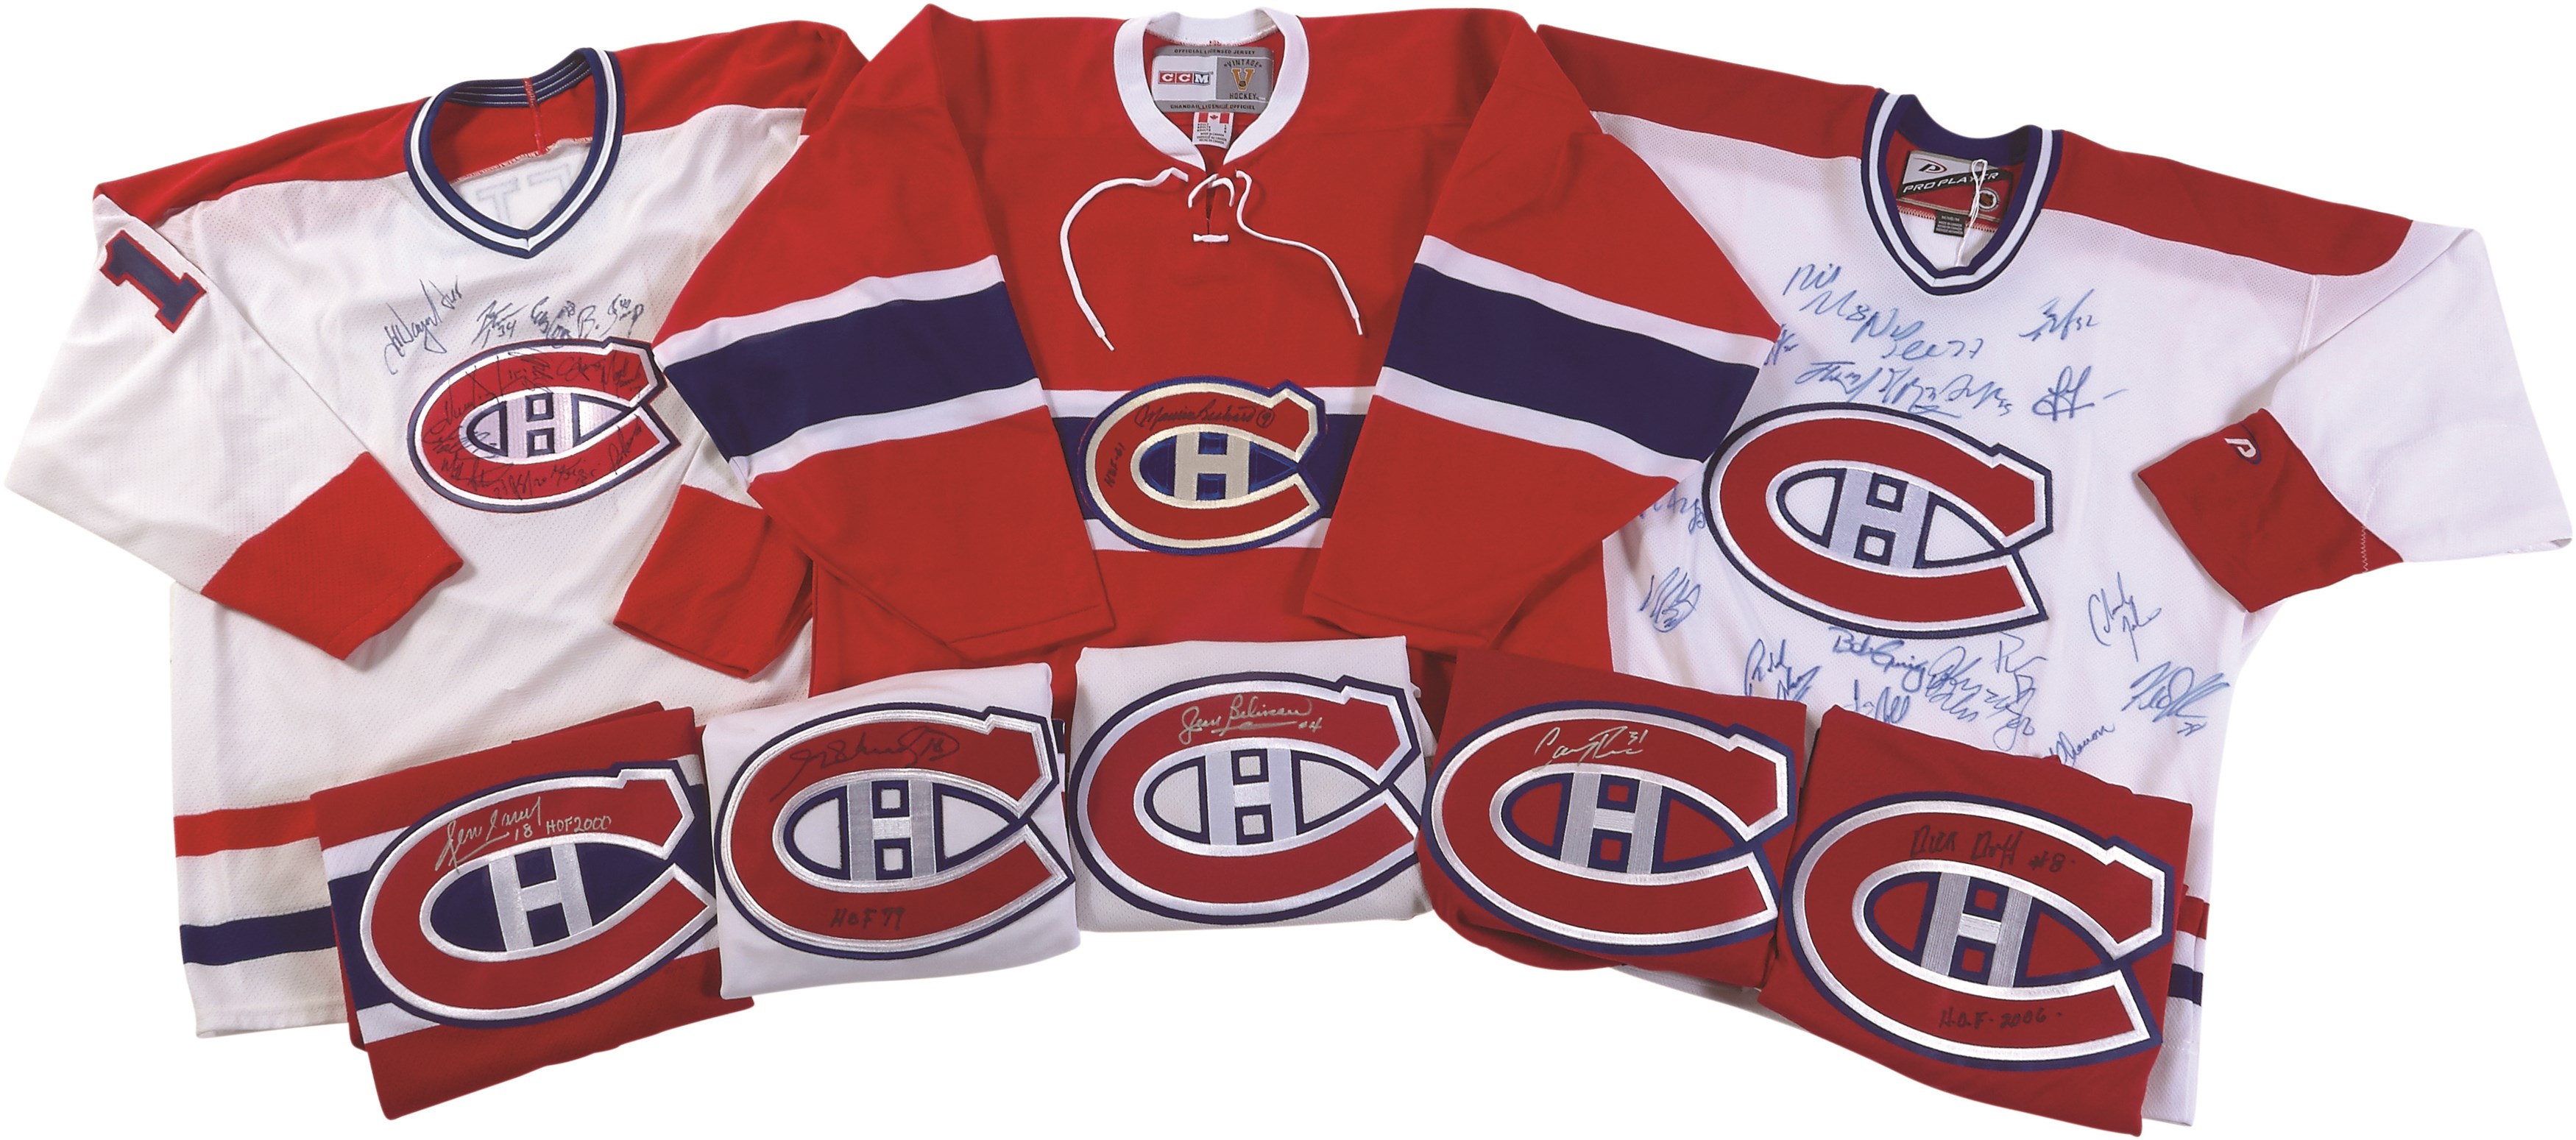 Hockey - Montreal Canadiens Signed Jersey Collection w/Beliveau & Richard (18)